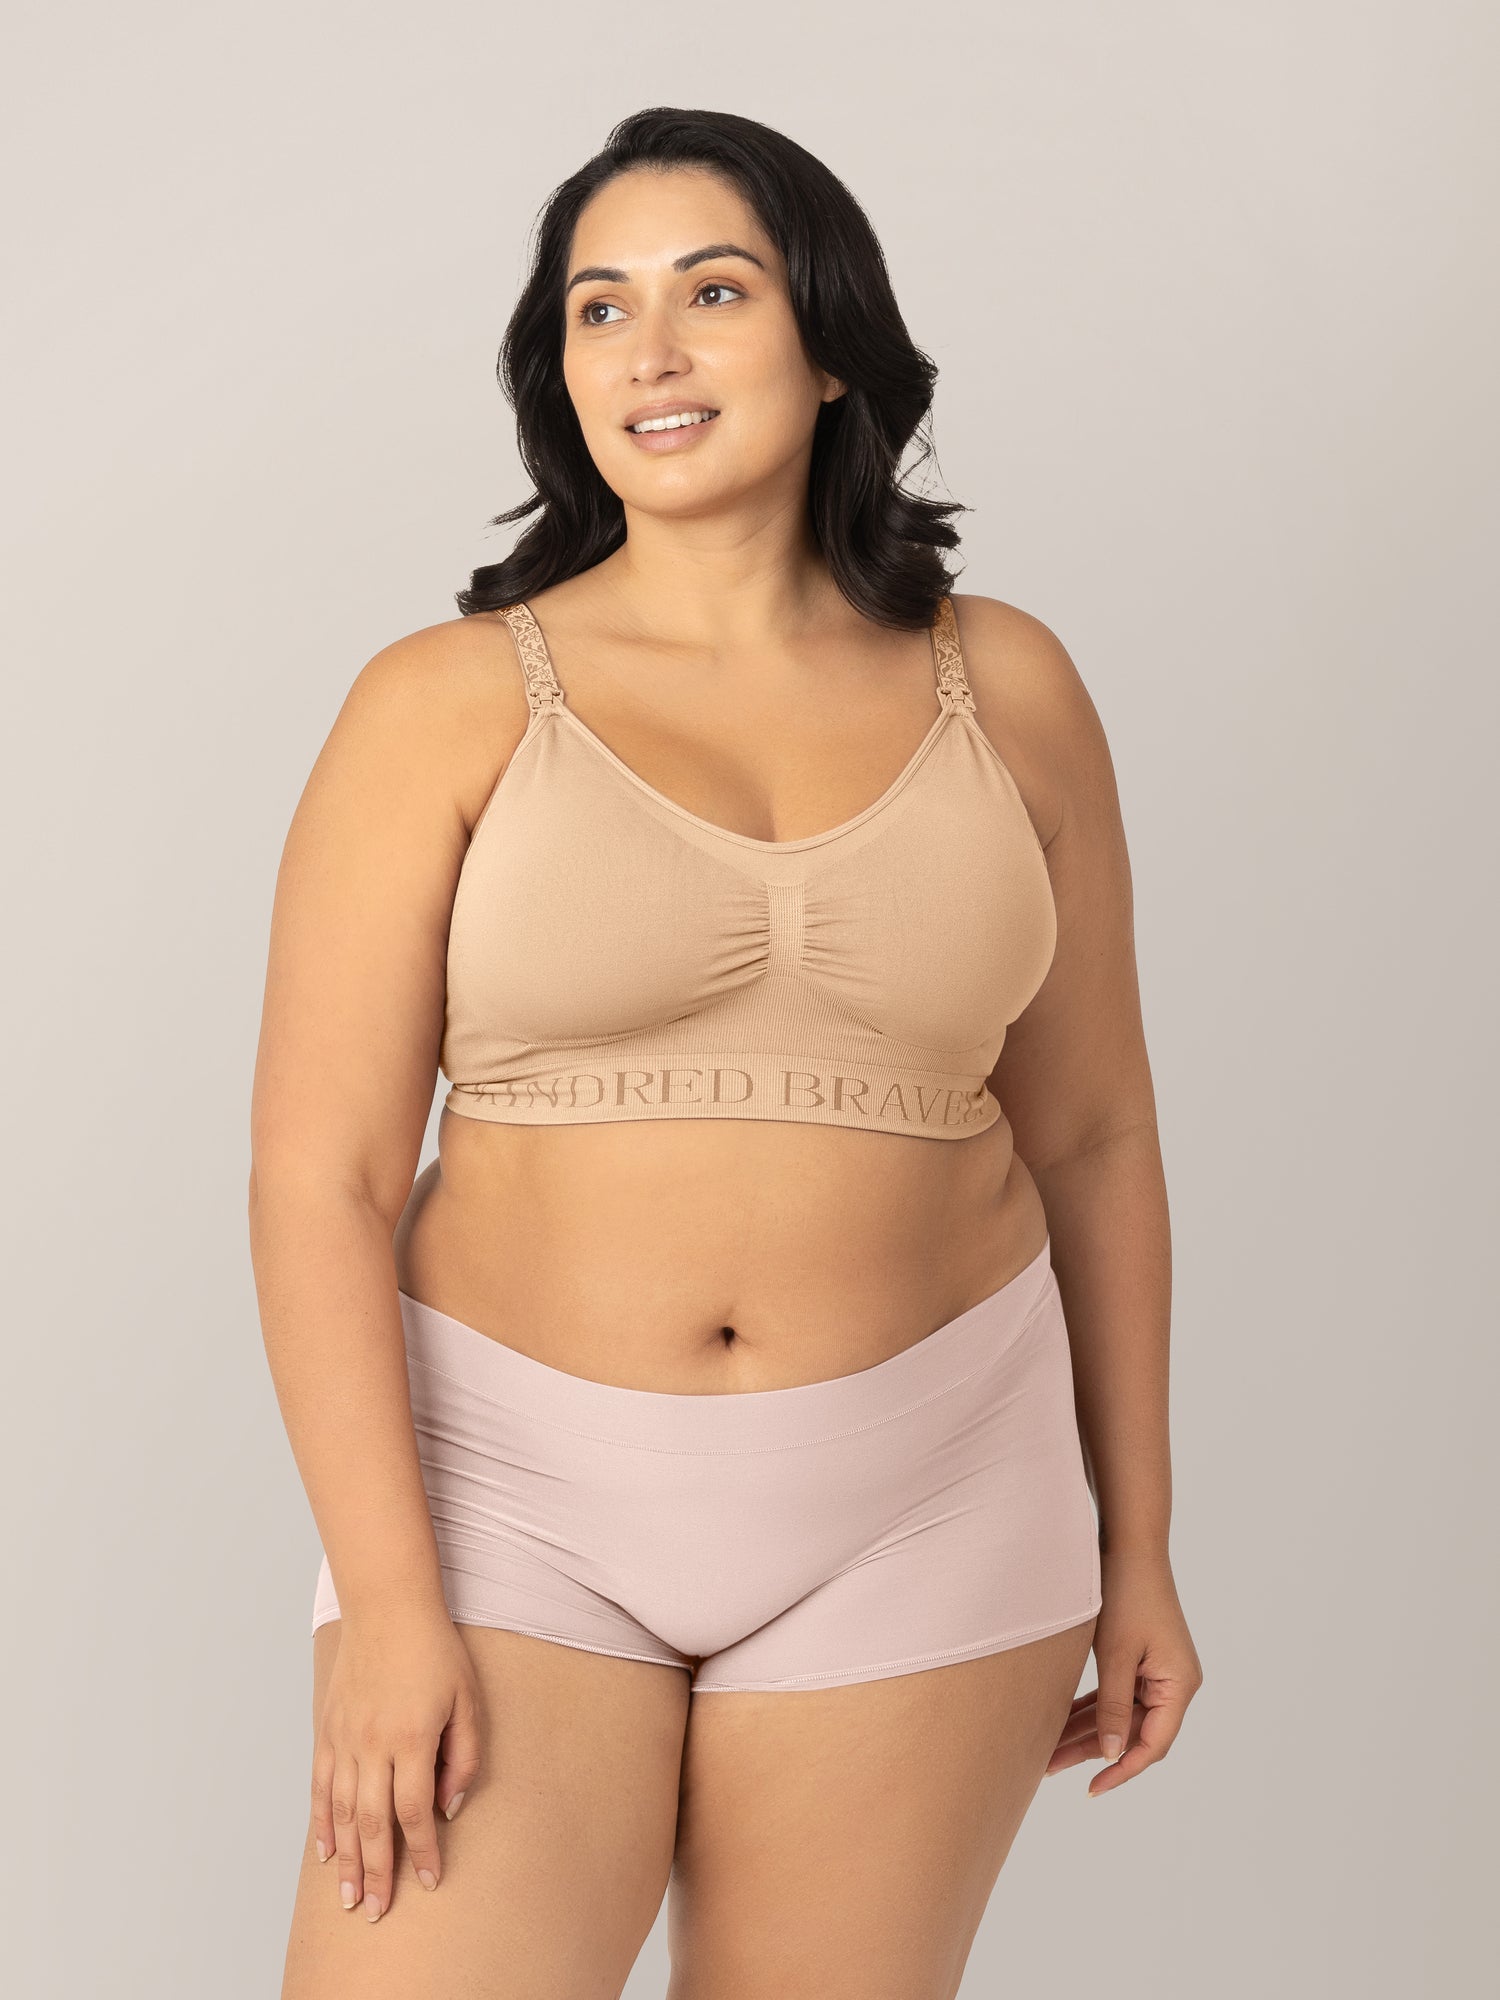 Model wearing the Sublime Nursing Bra styled with the Grow with Me Soft Pink Boyshort Underwear.  @model_info: Connie is wearing an X-Large.